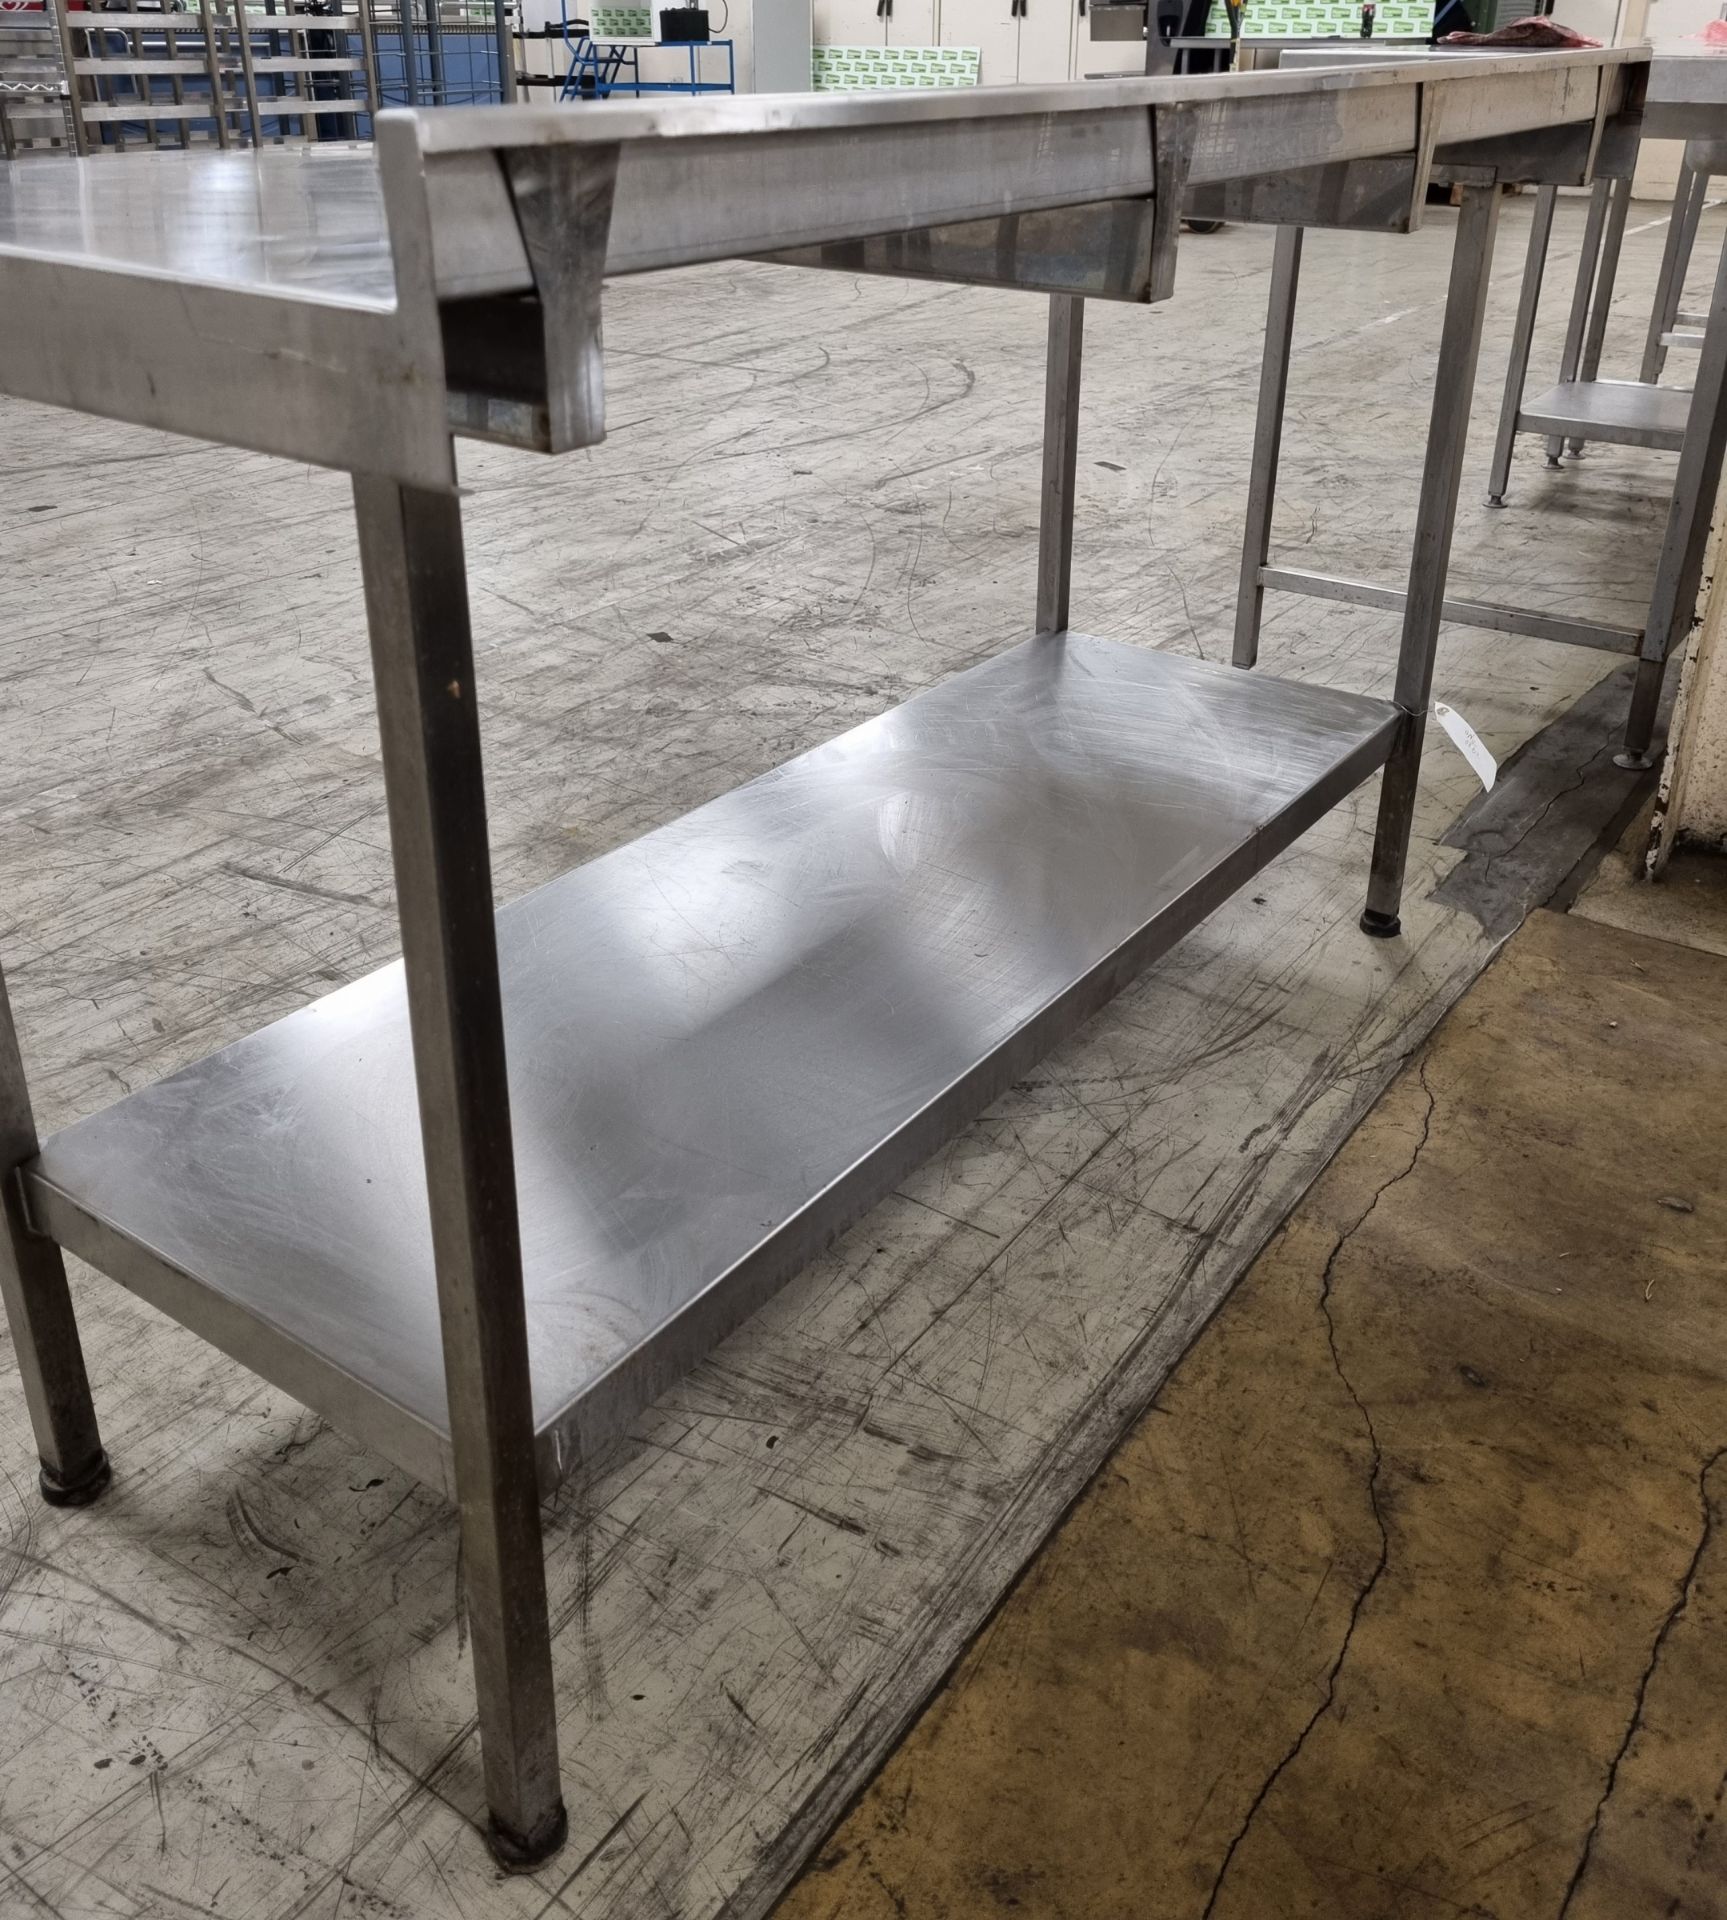 Stainless steel countertop with shelf - 60x150x96cm - Image 3 of 3